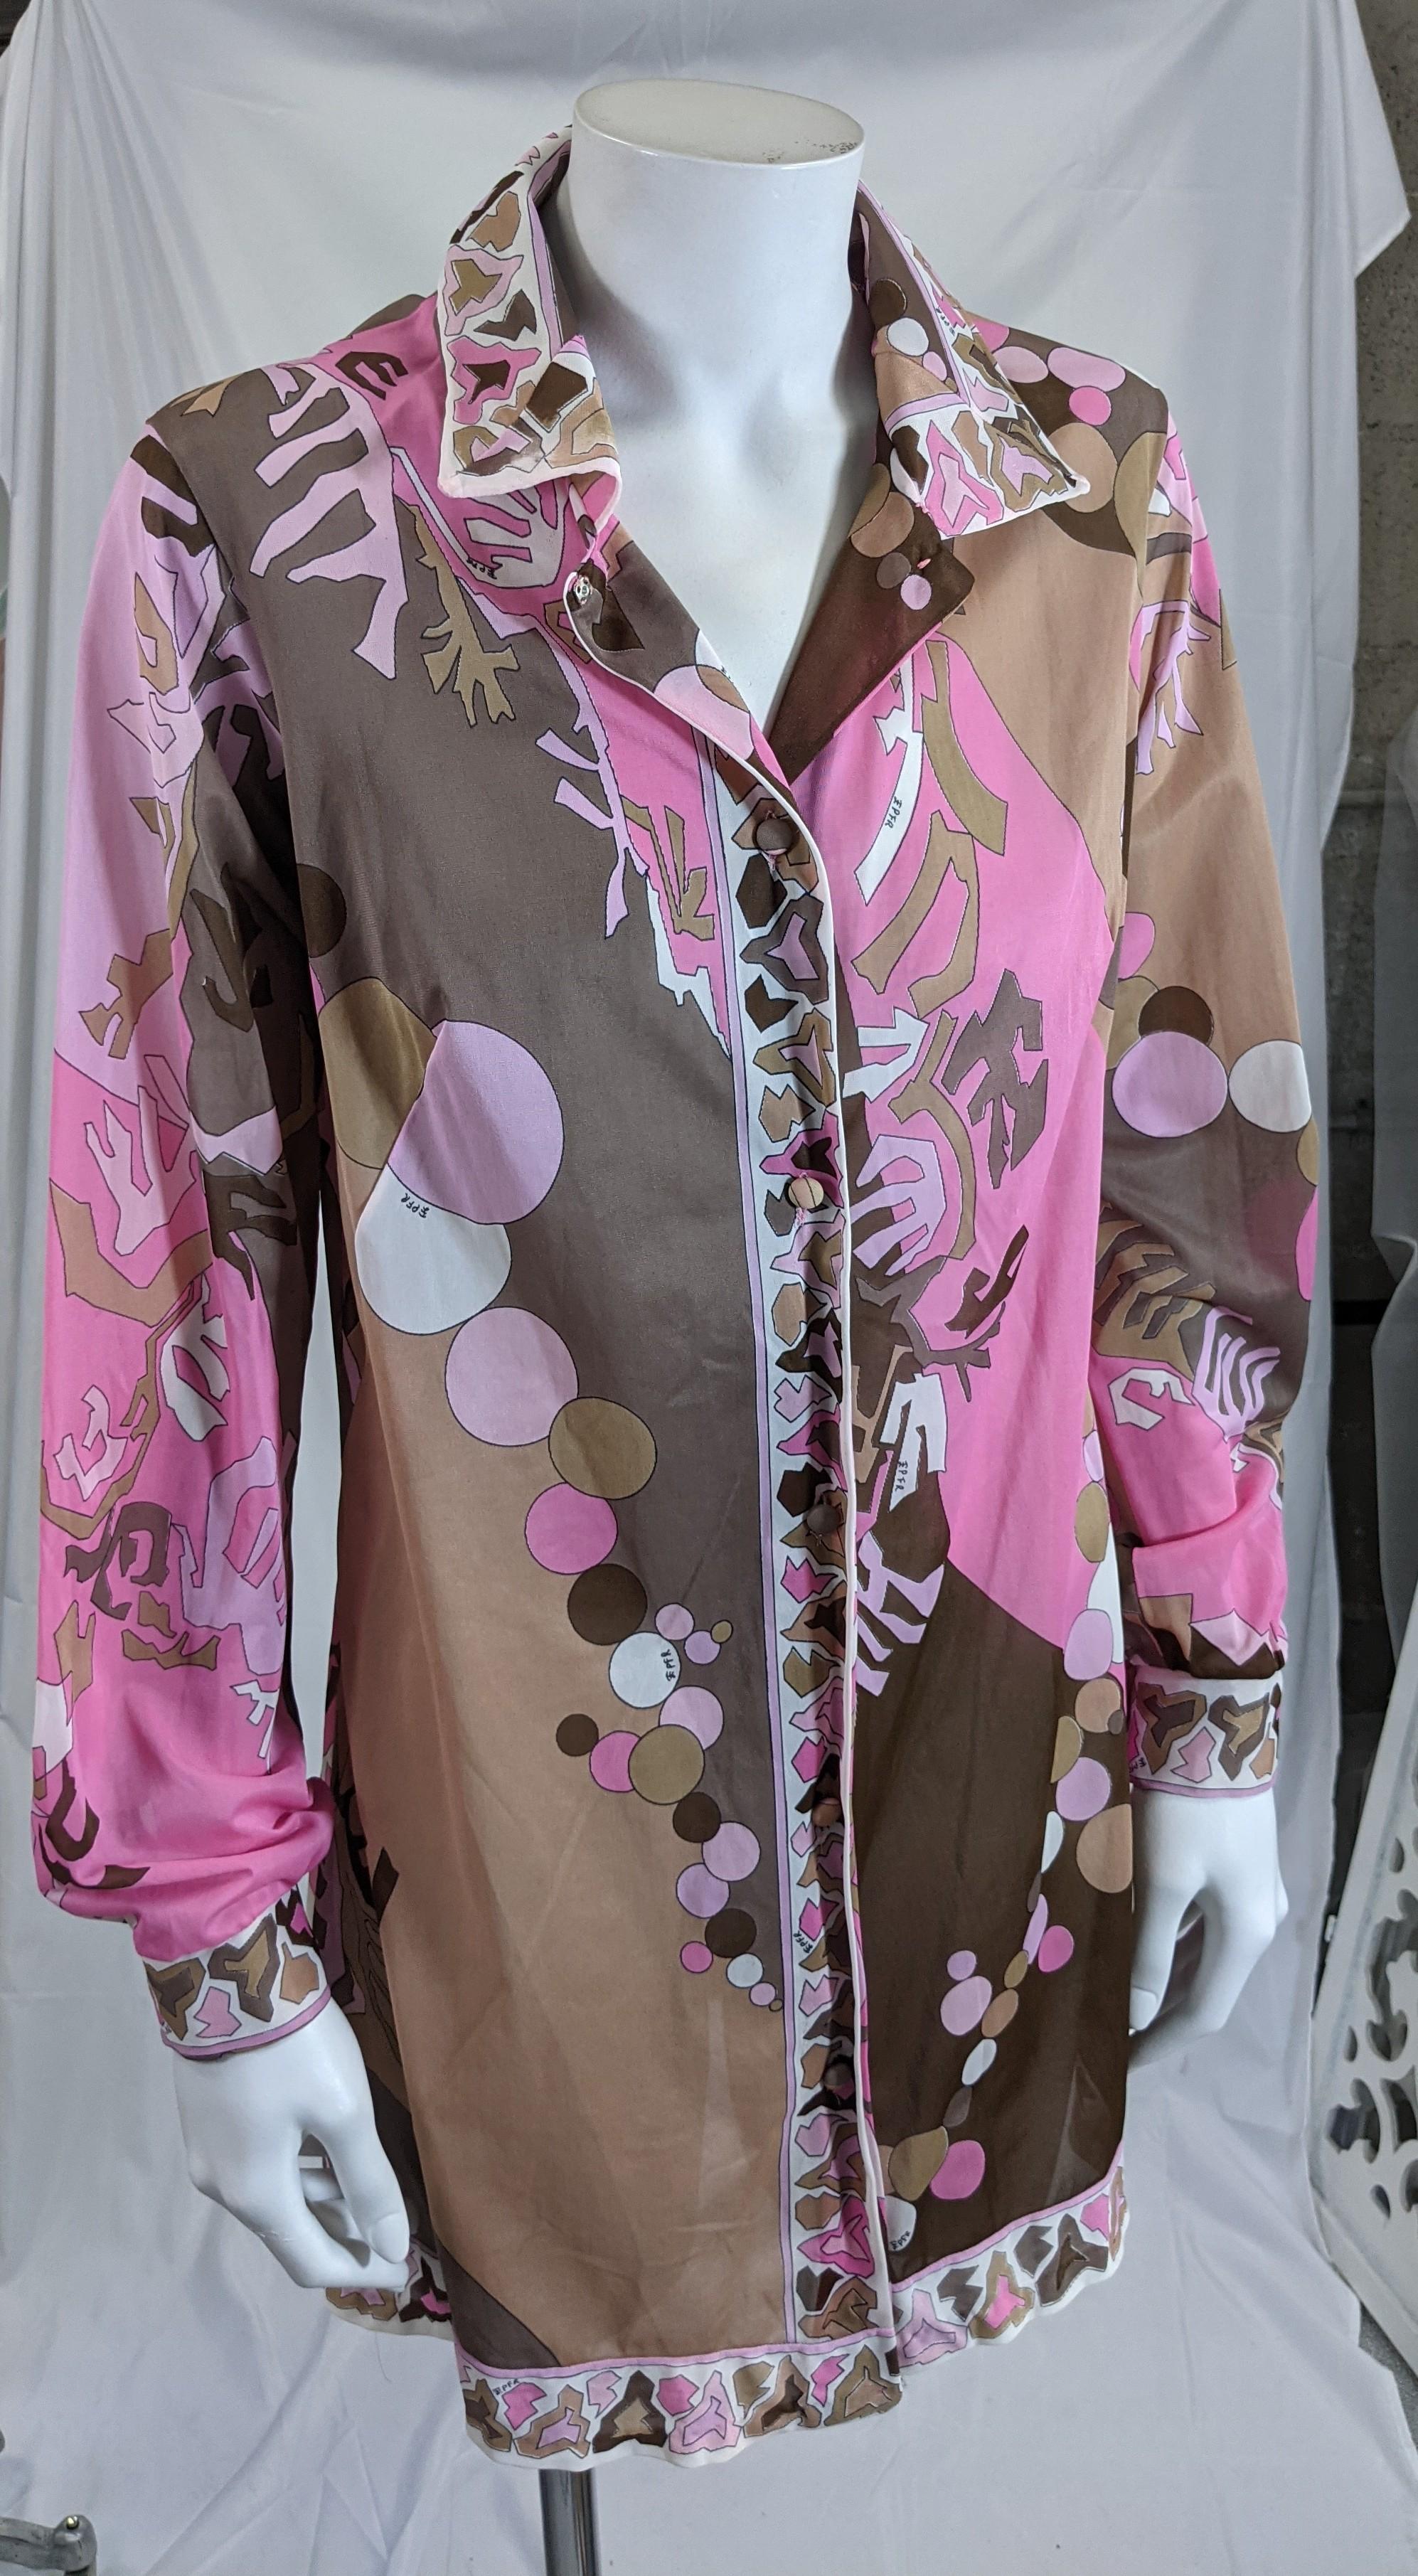 Pink and Brown Pucci light weight nylon jersey shirt dress for Formfit Rogers. Designed originally as loungewear for home wear, these versatile packable pieces are now worn as day and even evening wear. 
Shirt dress style with covered buttons